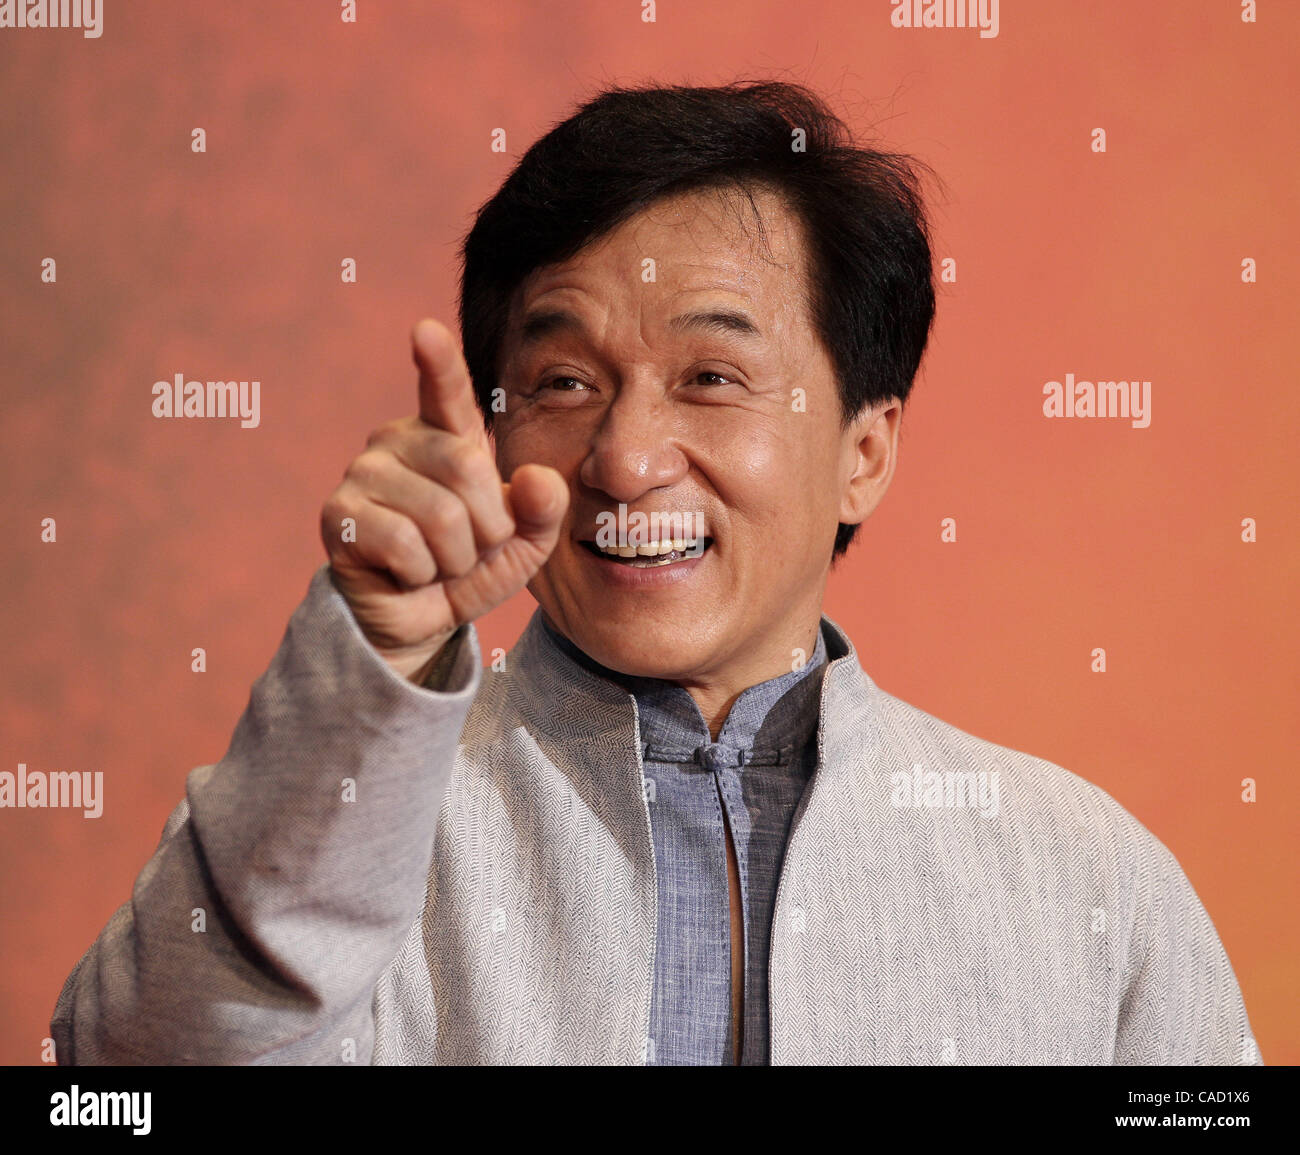 Aug 5, 2010 - Tokyo, Japan - Chinese actor Jackie Chan attends the Japanese premiere of 'The Karate Kid' on the red carpet at The Roppongi Hills on August 5, 2010 in Tokyo, Japan.(Credit Image: © Koichi Kamoshida/Jana/ZUMApress.com ) Stock Photo